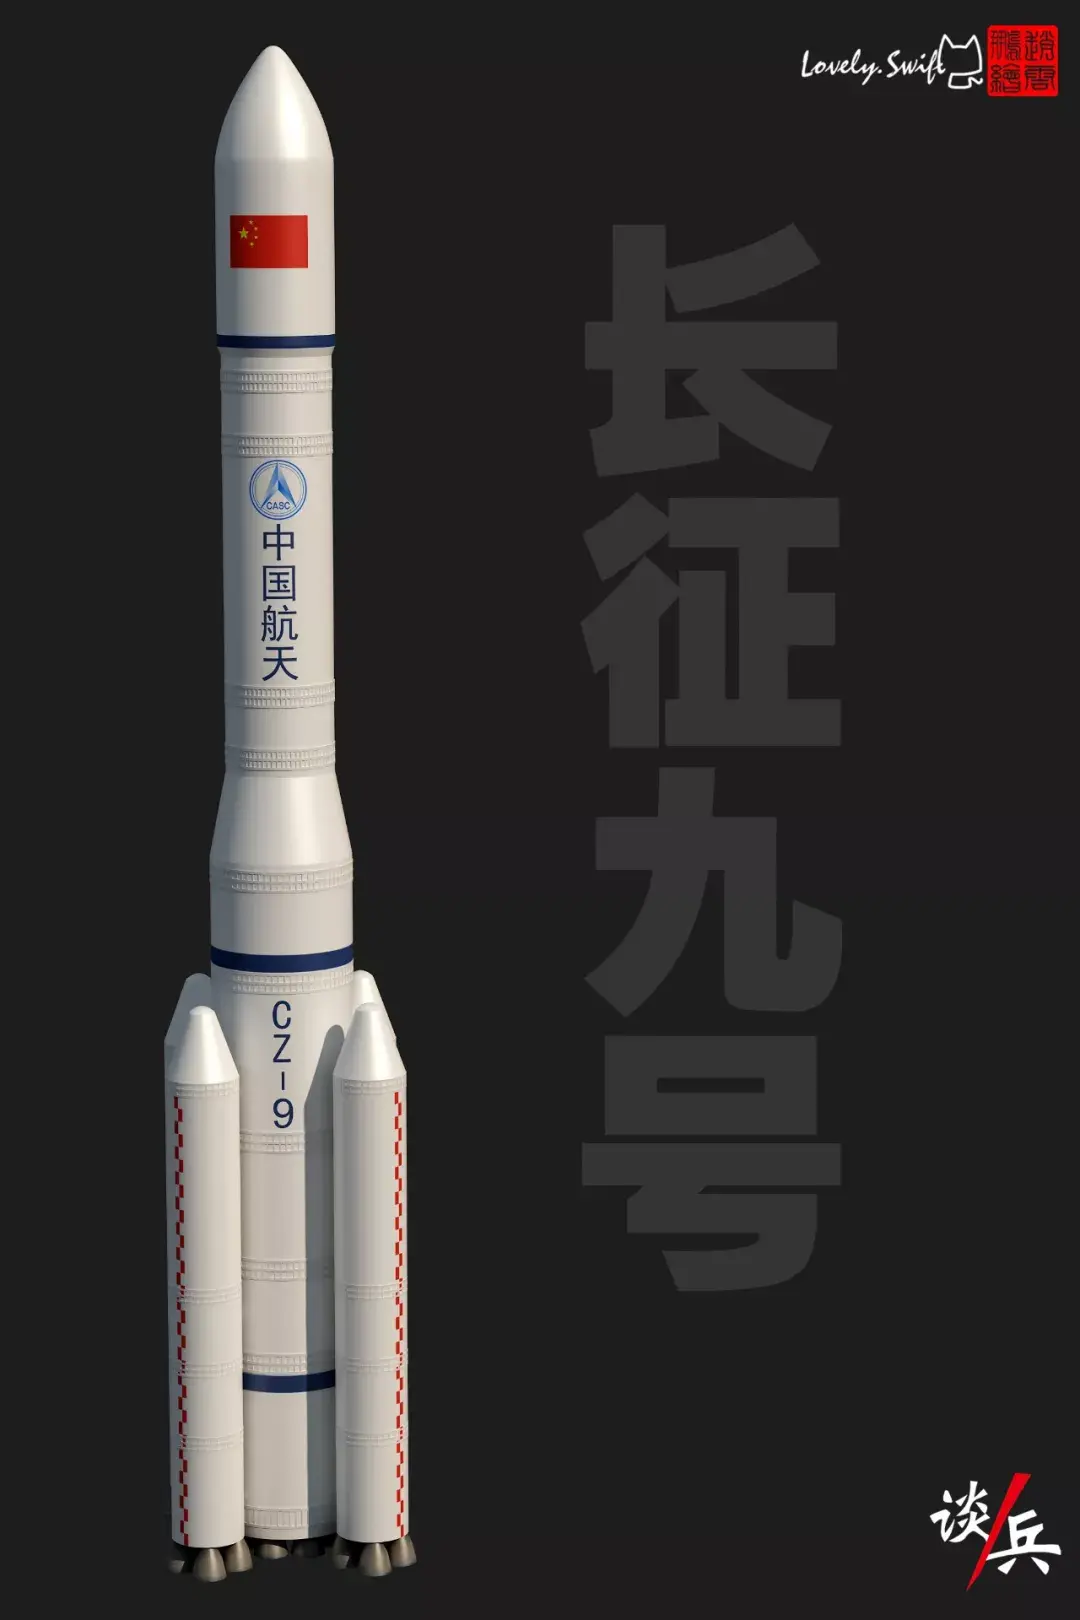 Chinese Space Program (CNSA) & Ch. commercial launch and discussion - Page 40 - Science ...